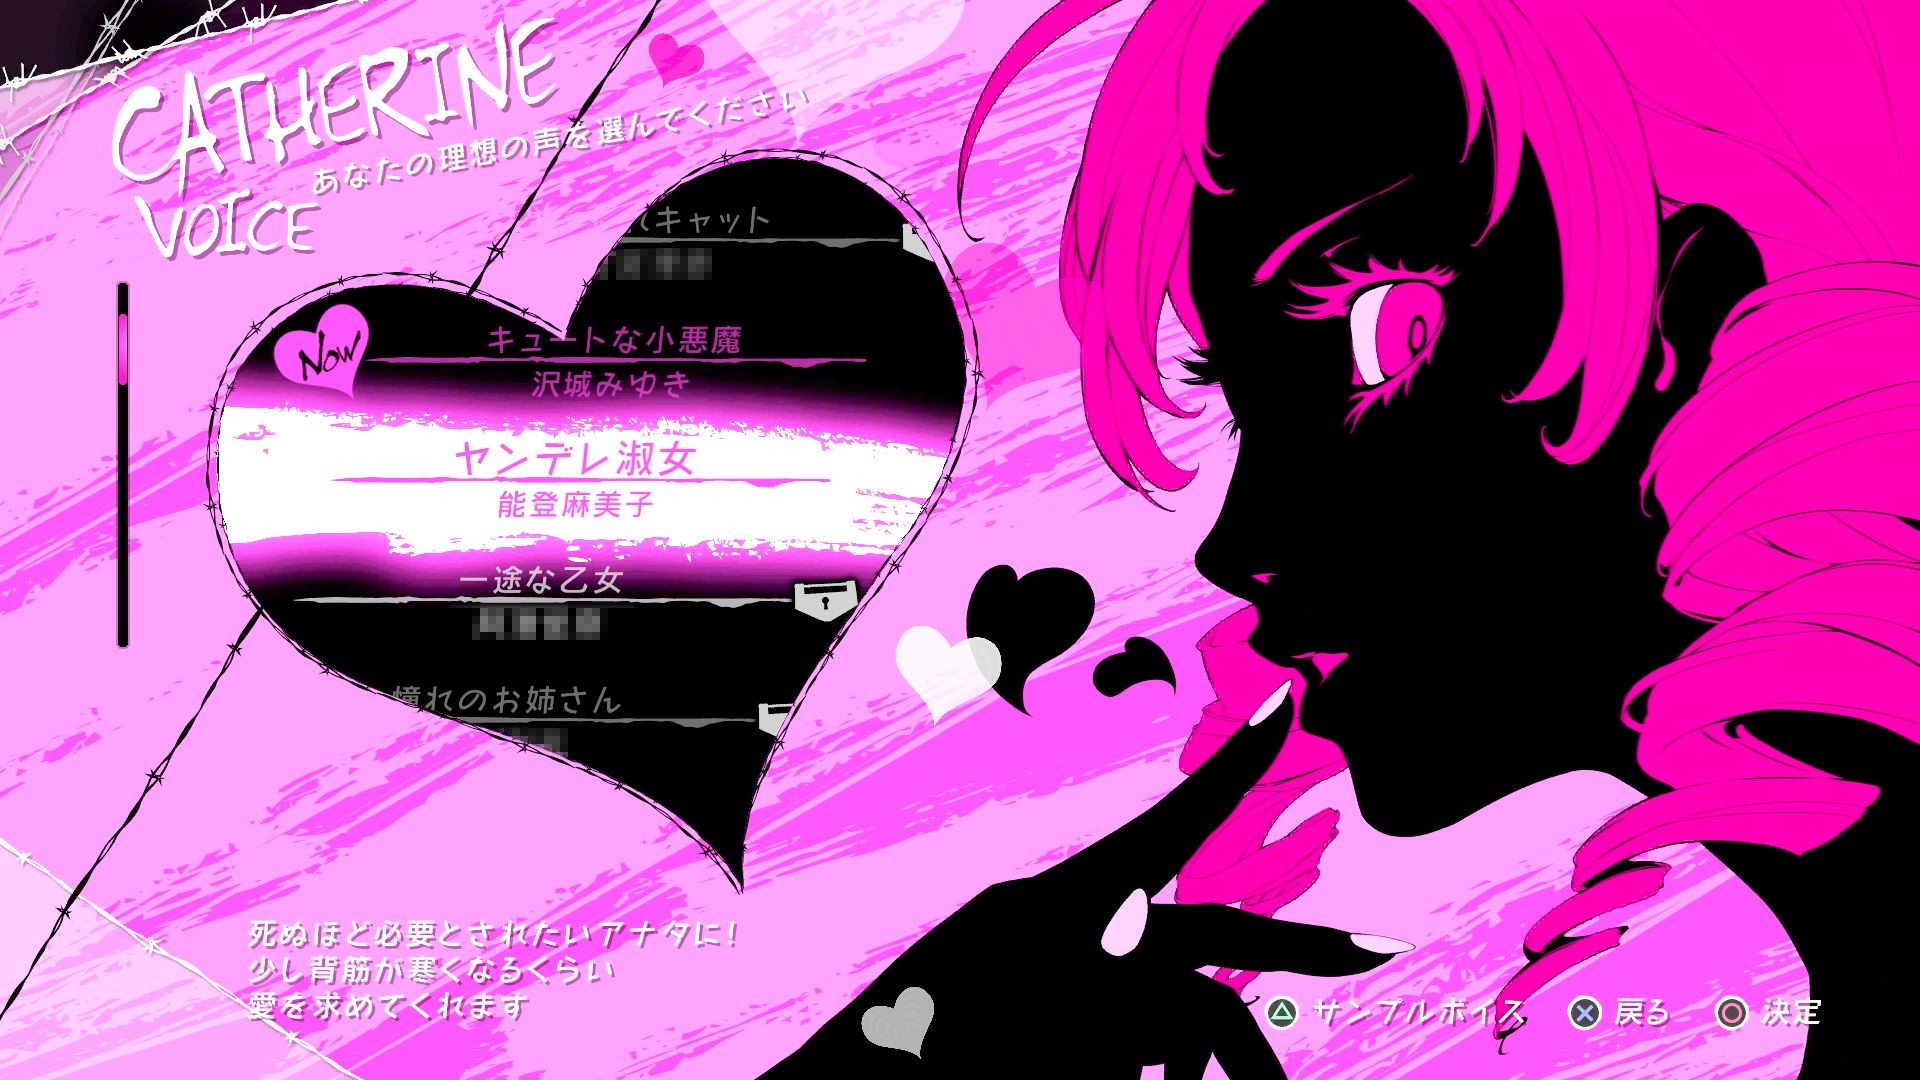 1920x1080 In the meantime, you can get an early sneak peek of Catherine: Full Body by  checking out its opening scene.